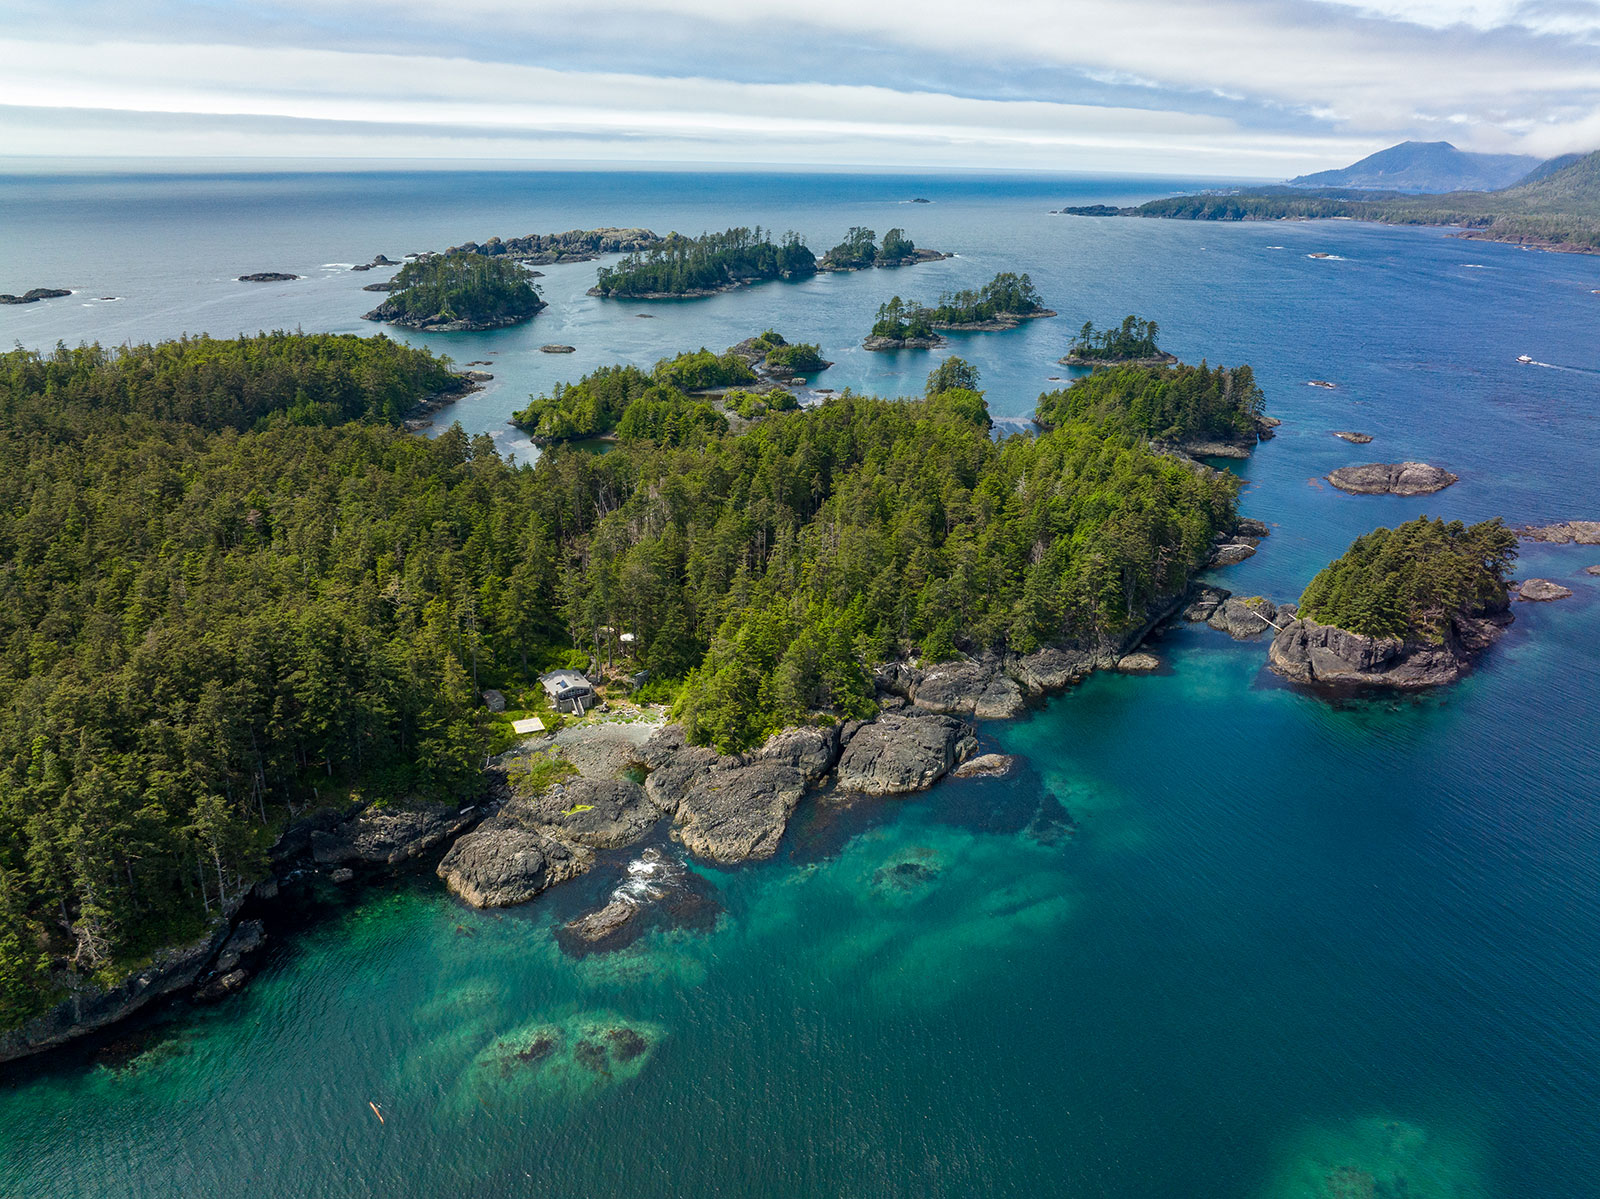 An aerial shot looks down at islands in Gwaii Haanas. The water is clear enough to see large underwater boulders and seaweed. Coniferous trees coat the land above the high-tide line.